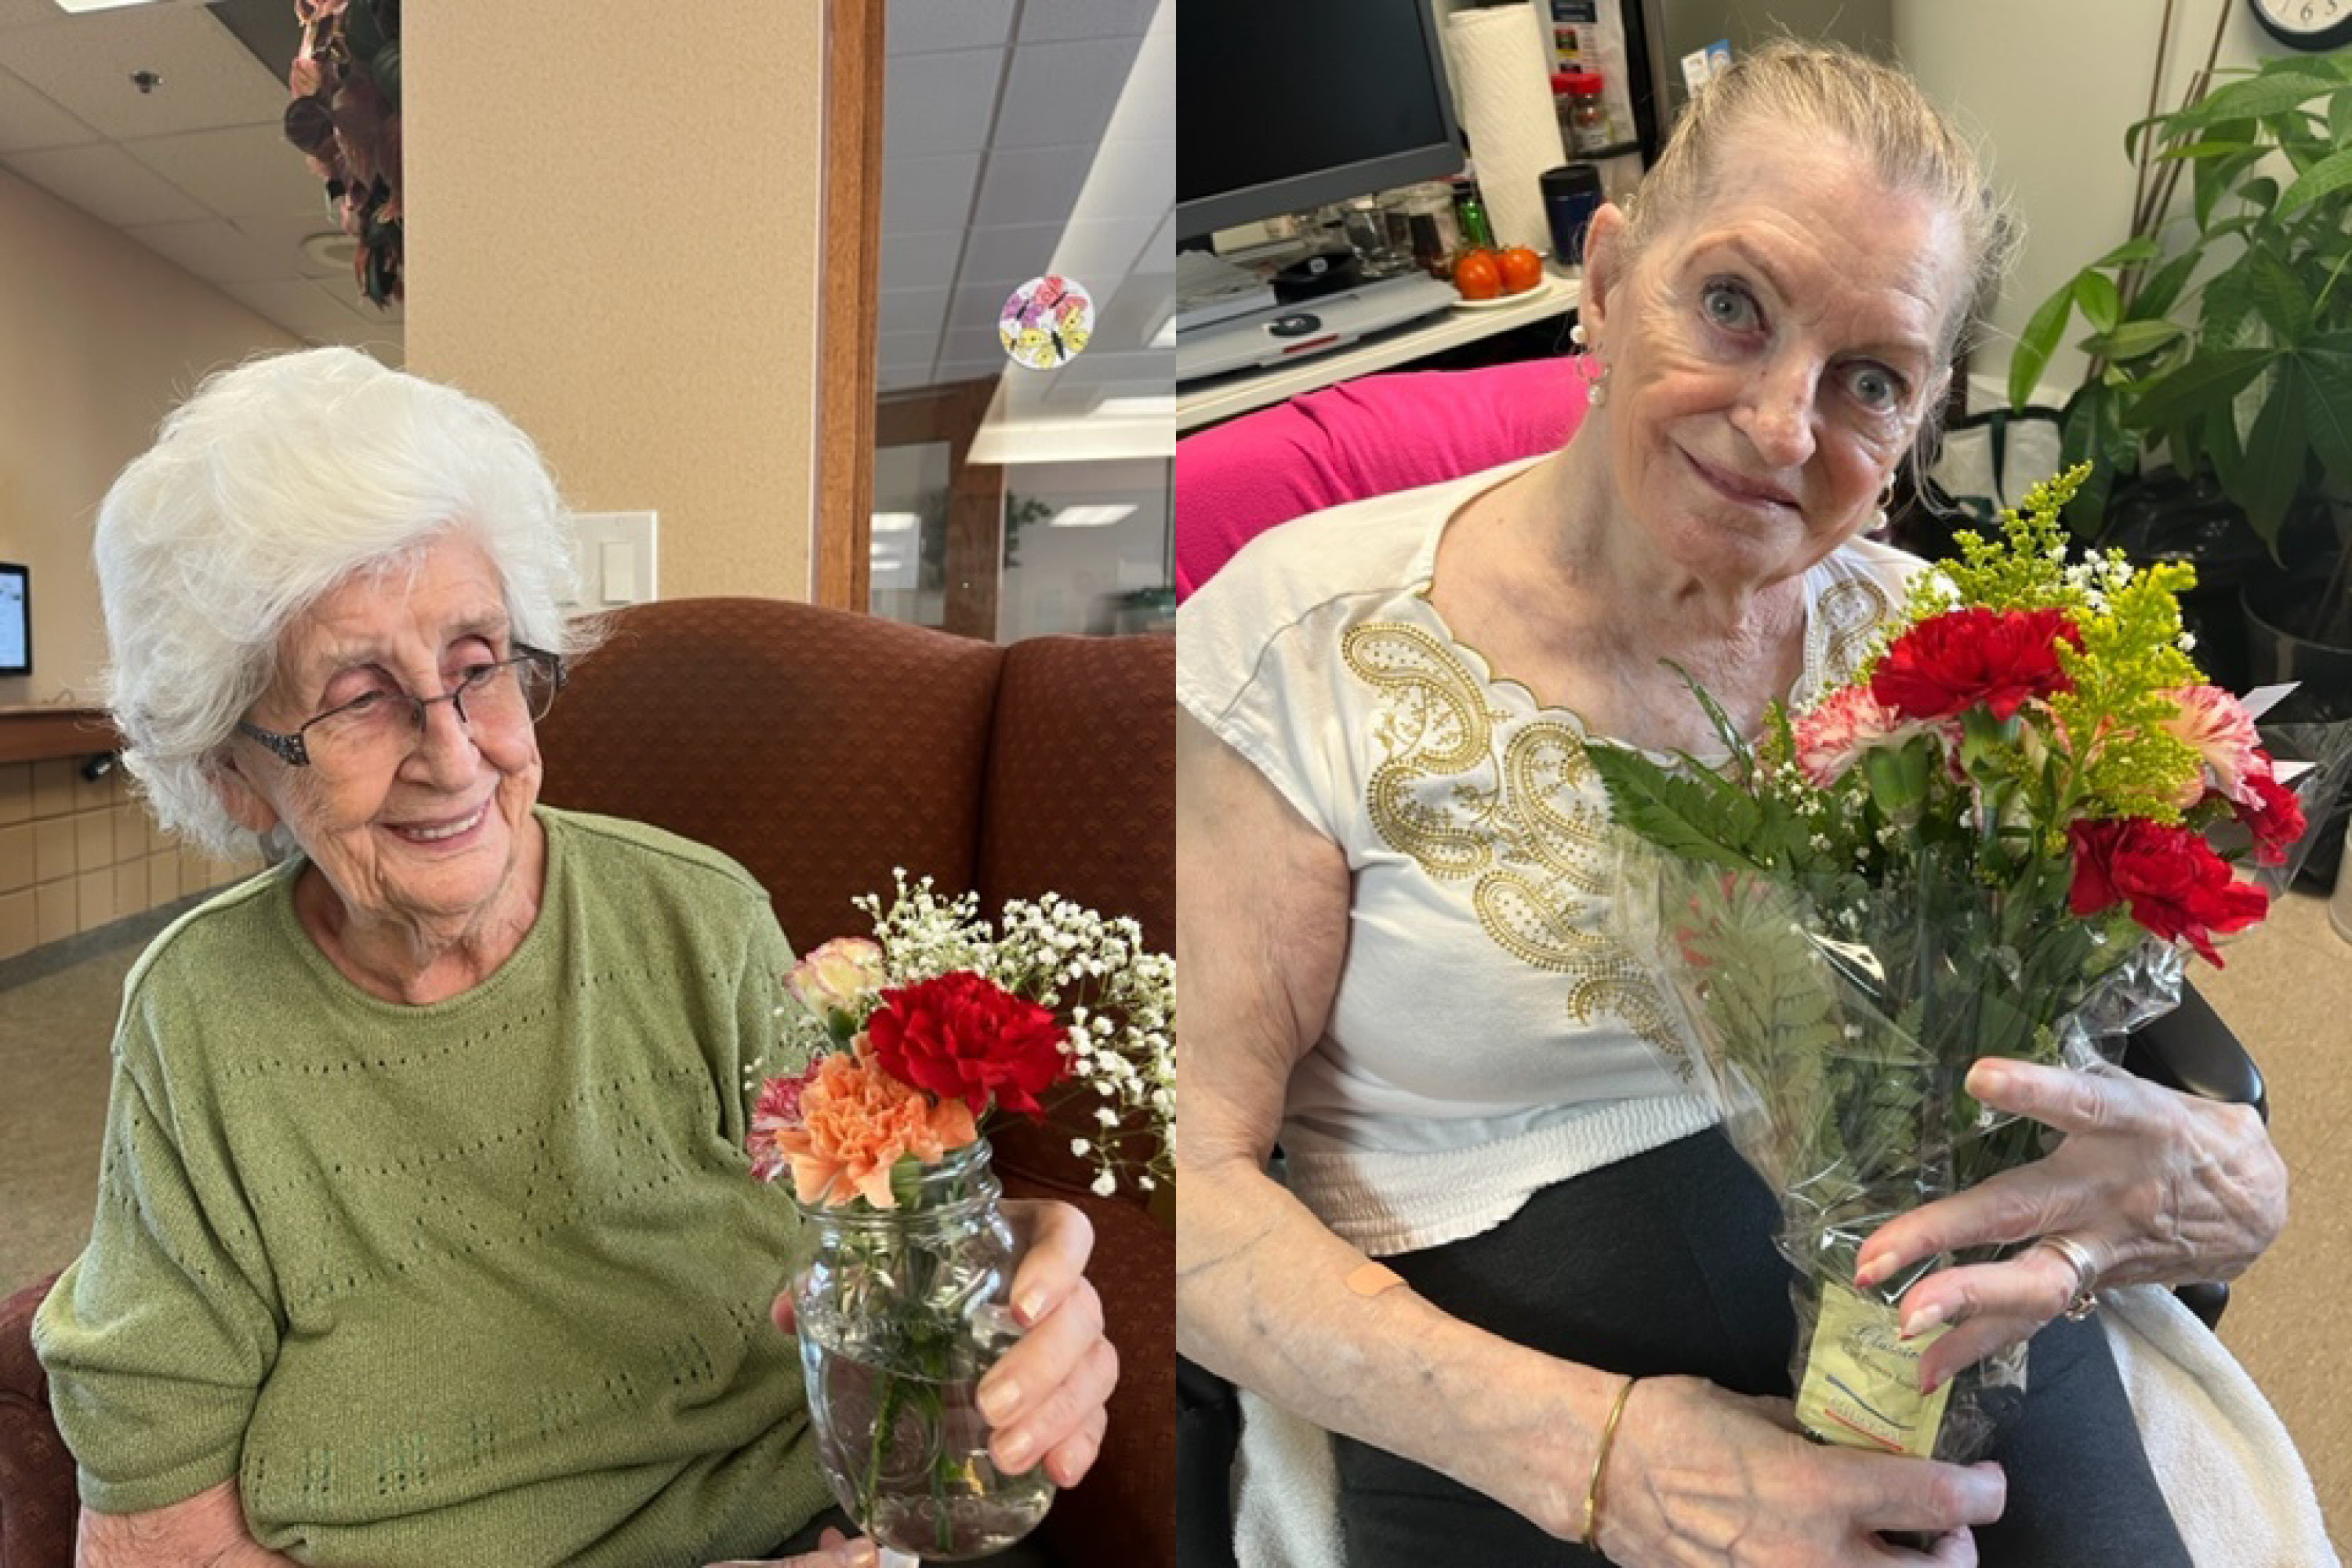 seniors sit with flowers that were gifted from local florist